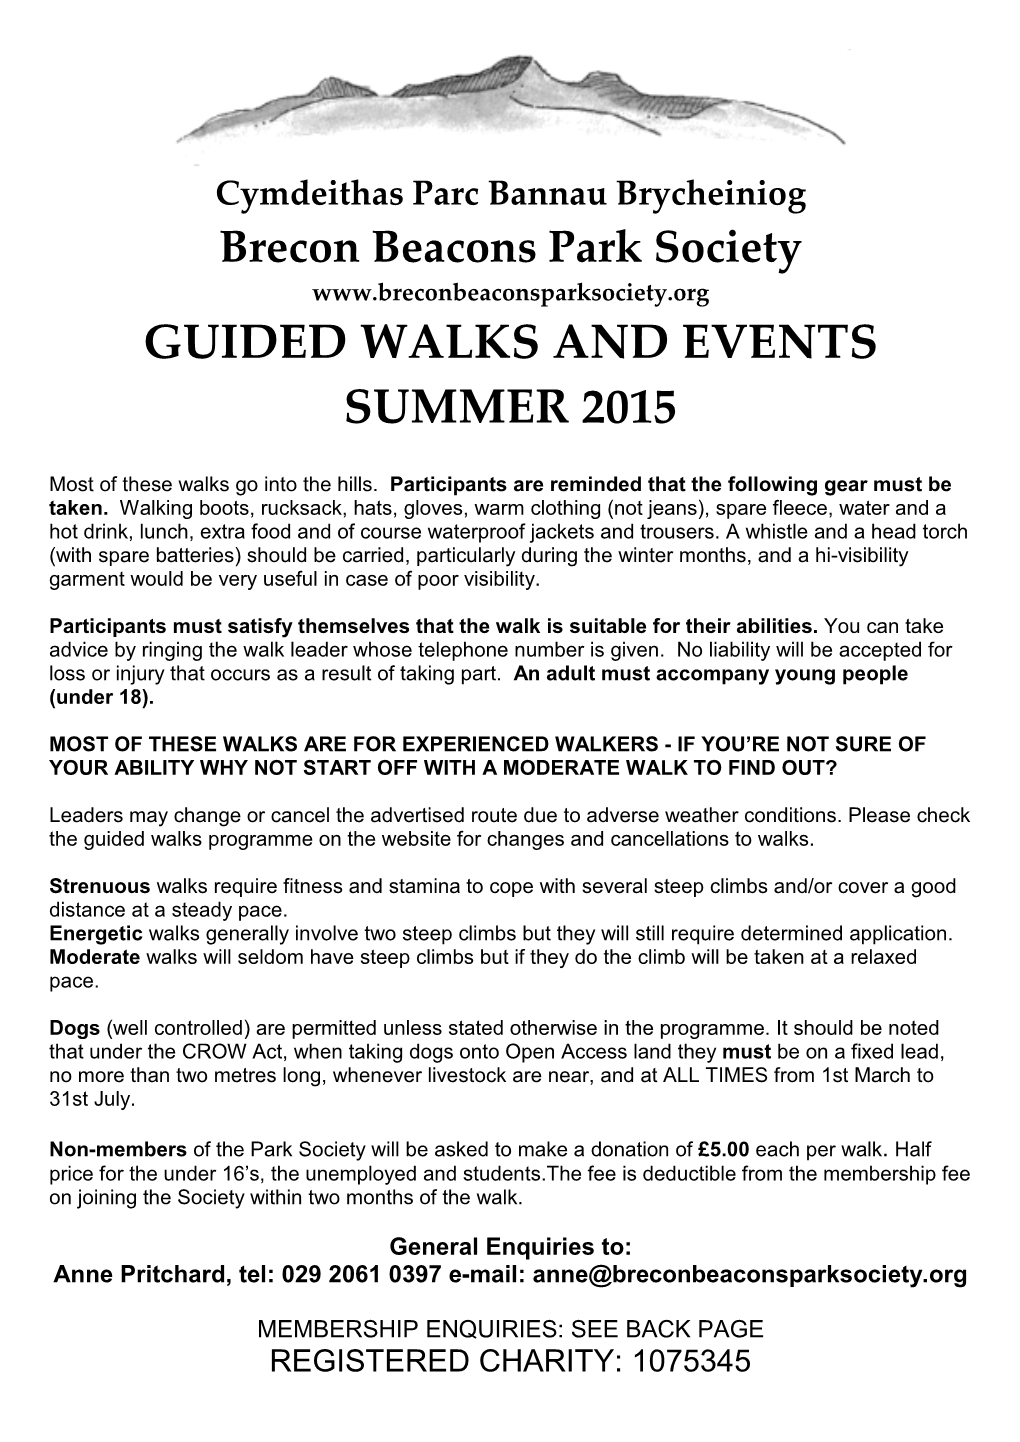 Guided Walks and Events Summer 2015